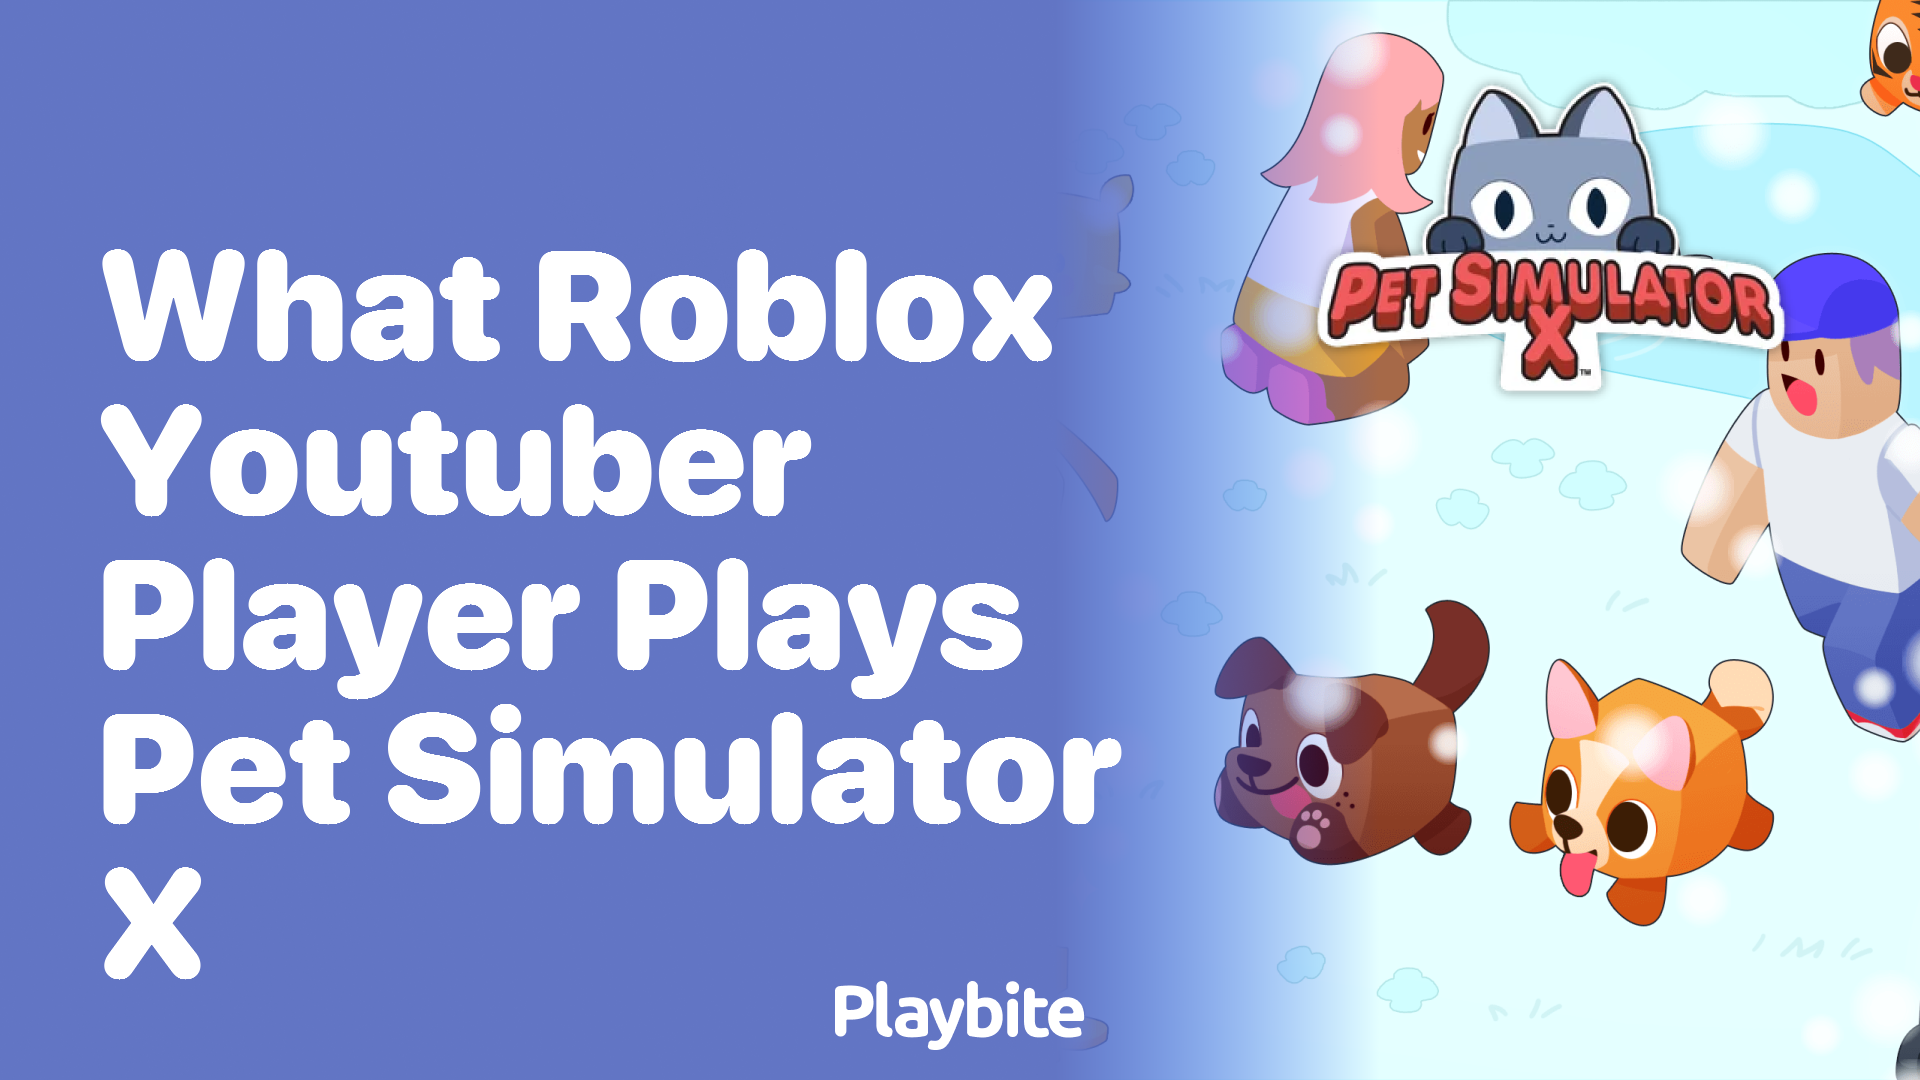 What Roblox YouTuber Player Dives into Pet Simulator X?